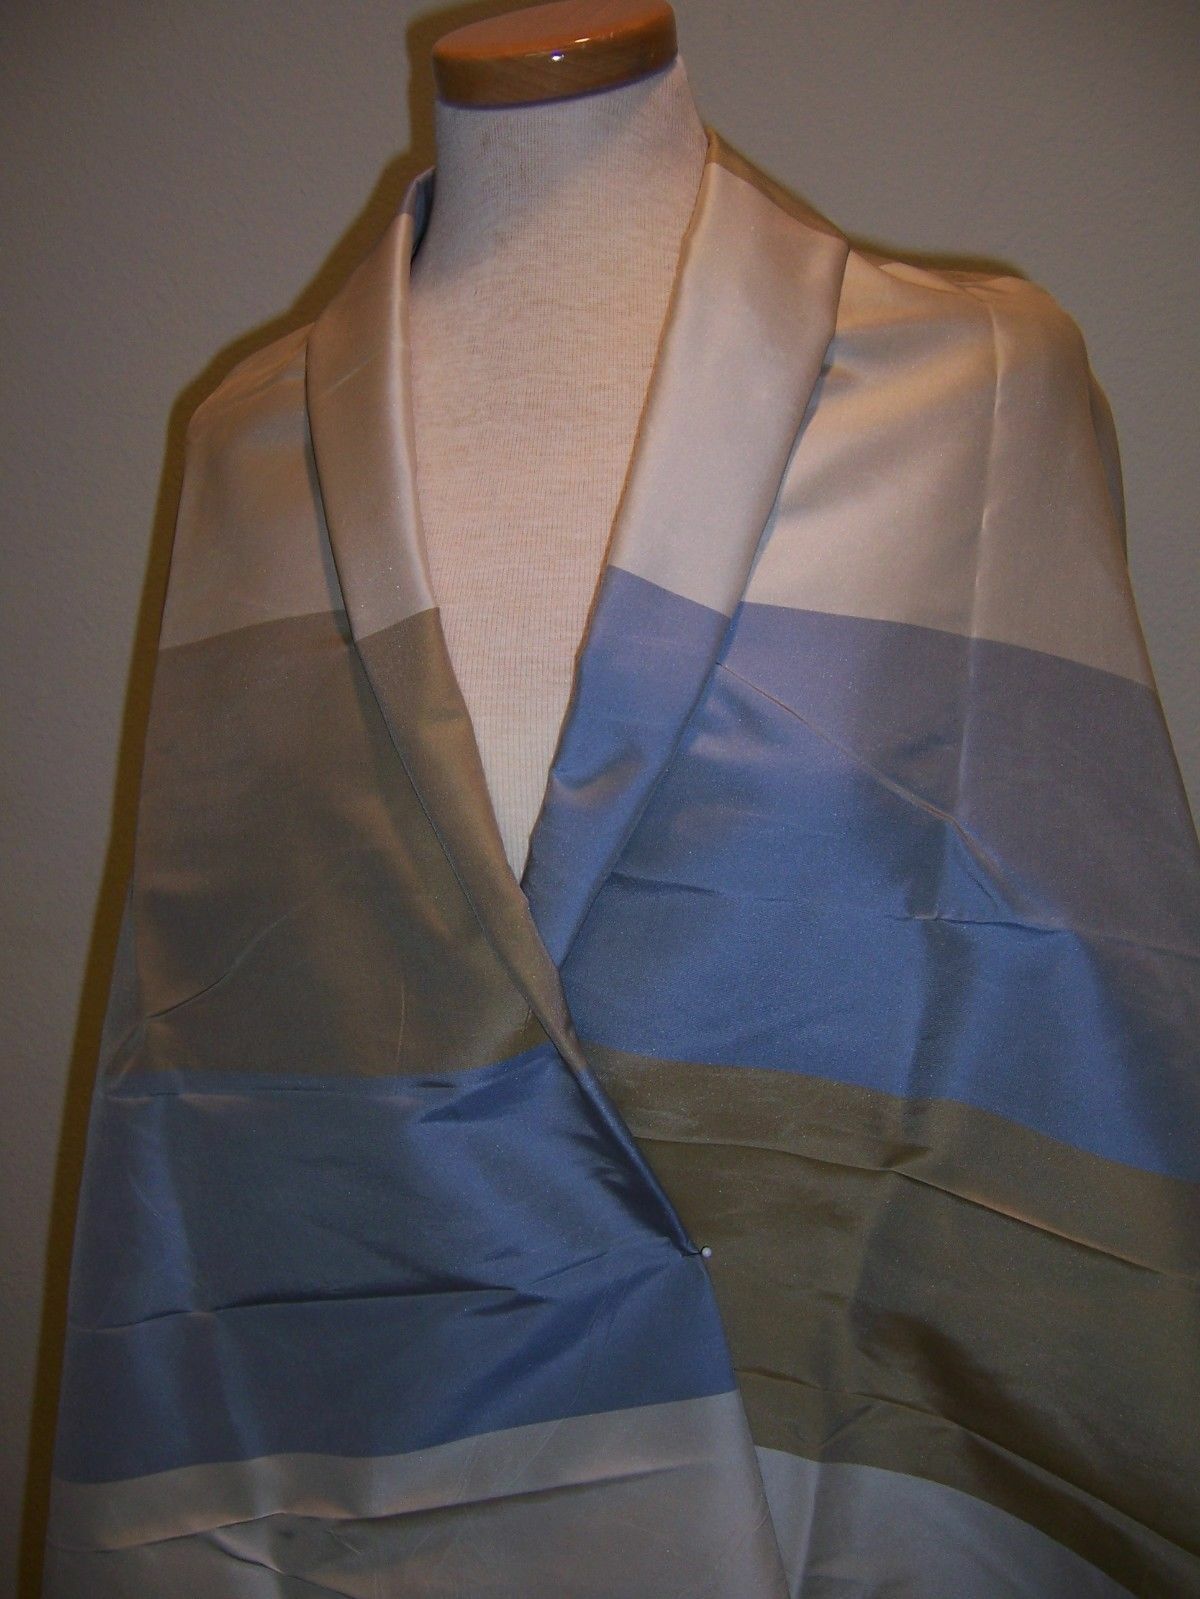 Primary image for 2.25yd ITALY SILK TAFFETA WIDE BAND IRE BLUE GREY TAUPE FABRIC DRESS/HOME#BP6